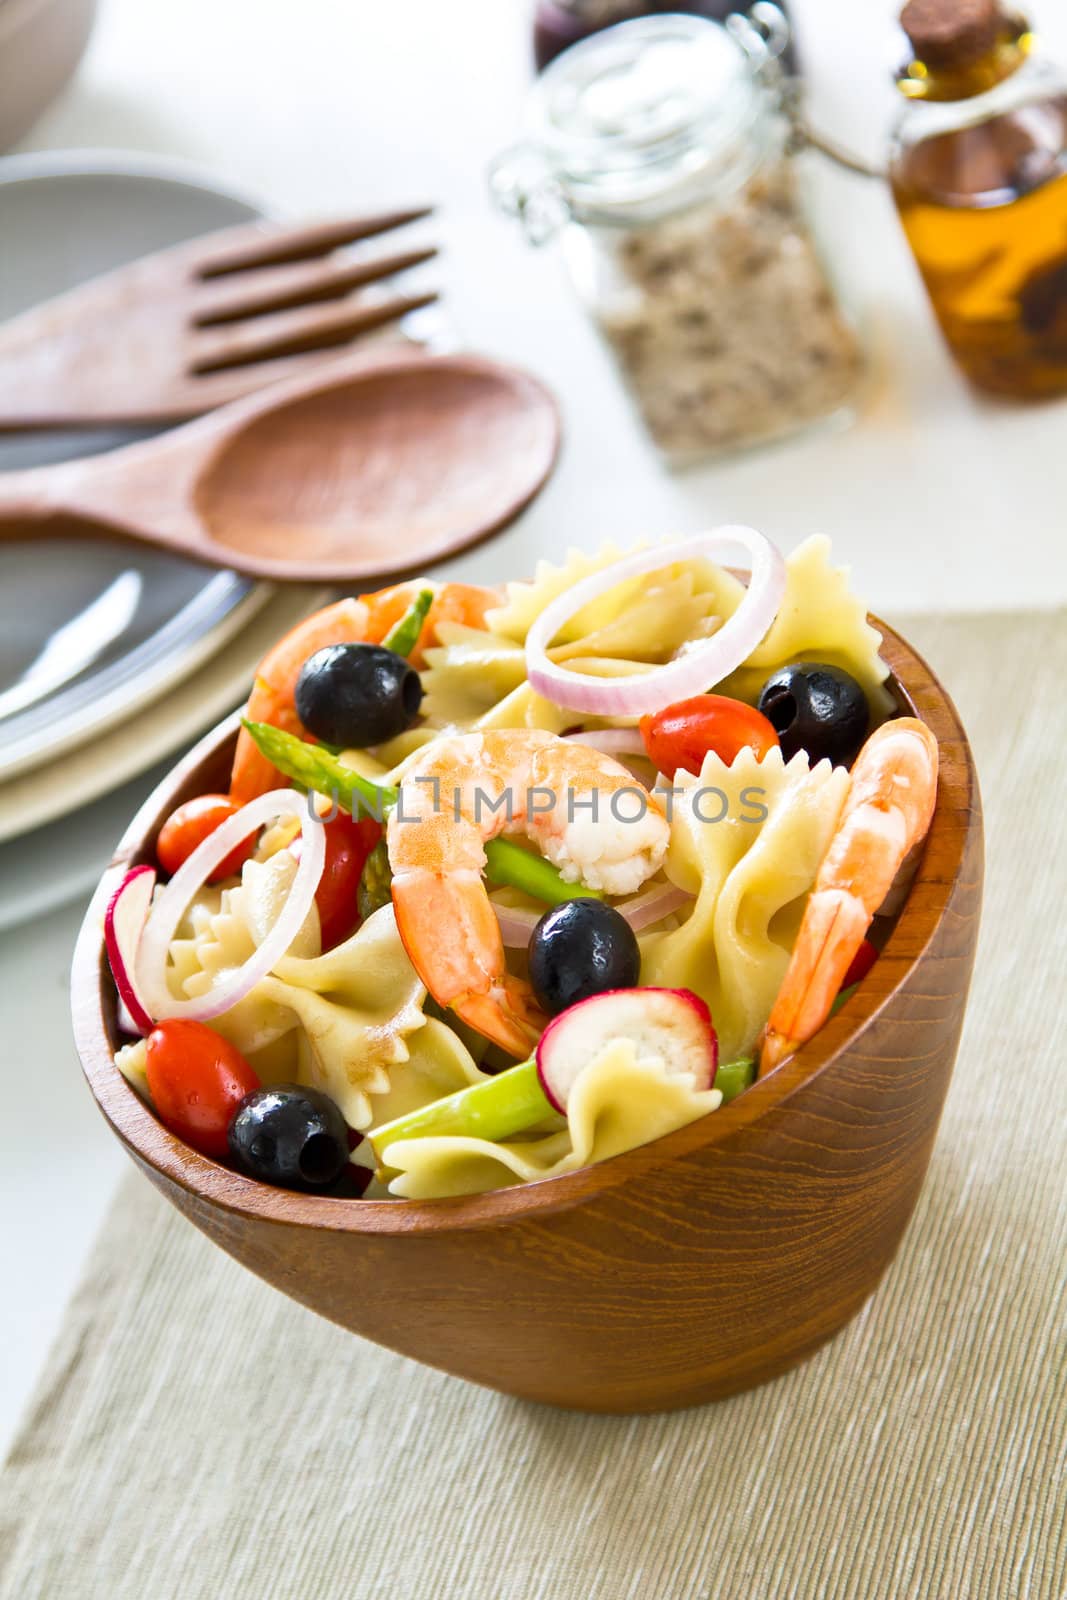 Farfalle with prawn and olive  salad in wood bowl